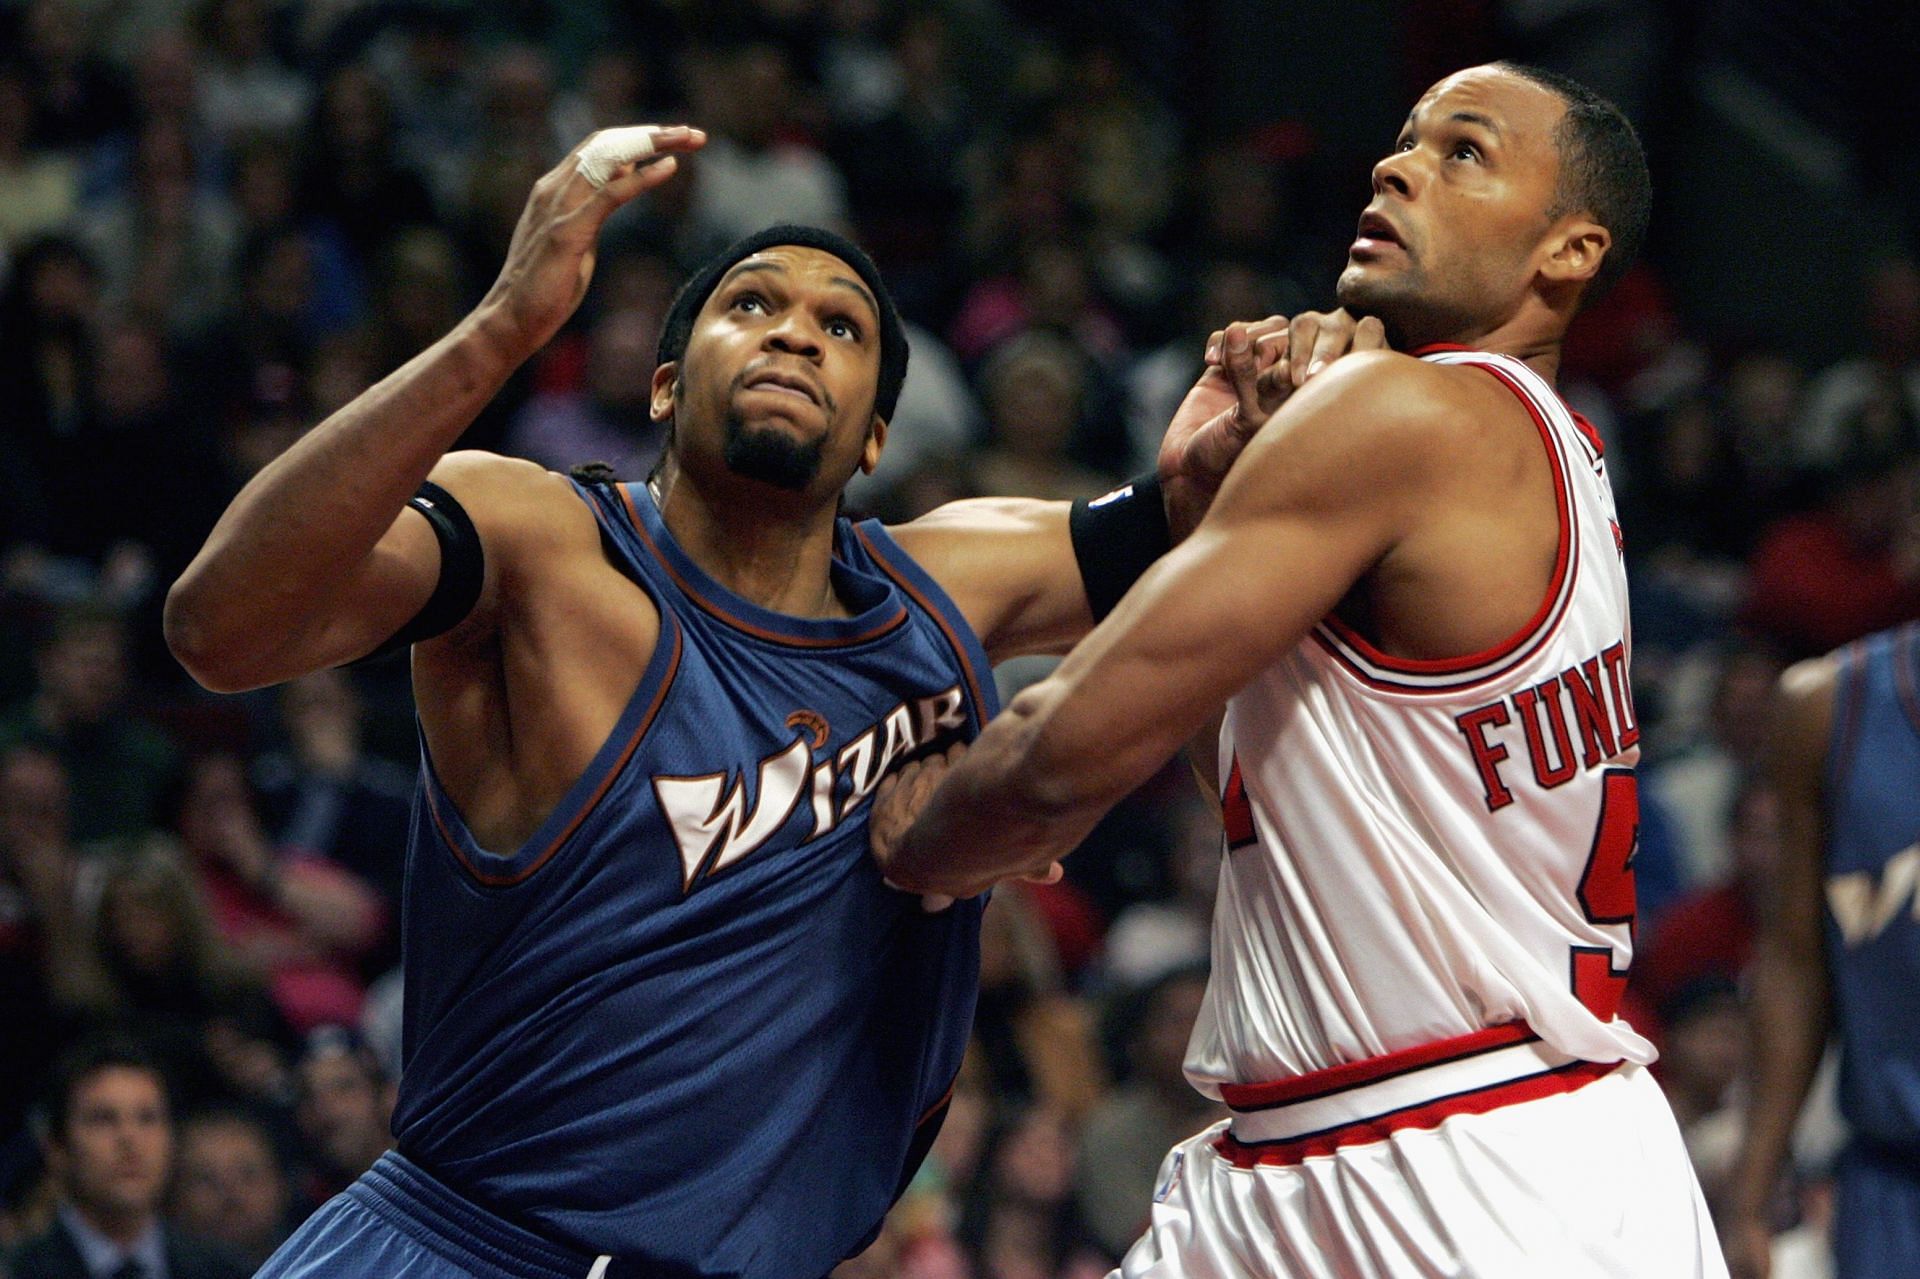 Lawrence Funderburke in the match between Washington Wizards v Chicago Bulls